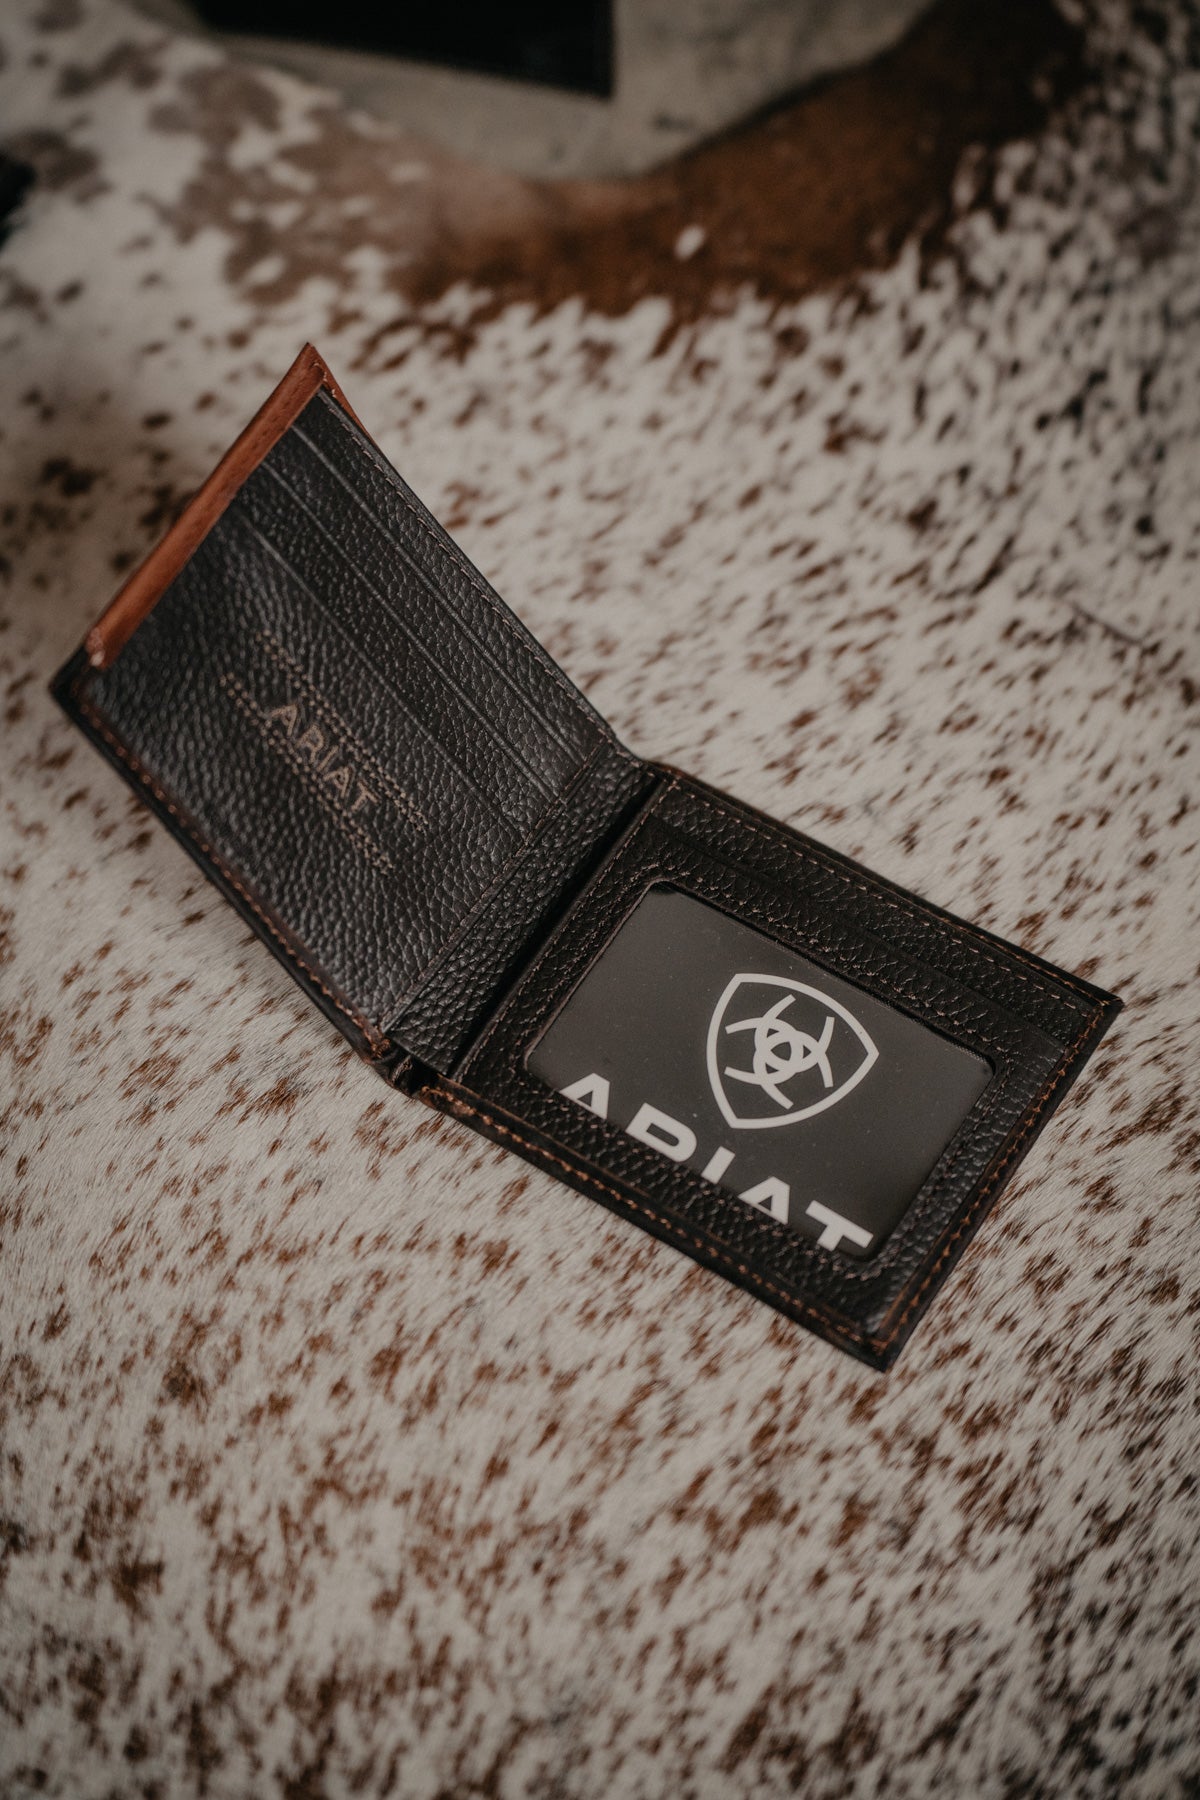 Men's Ariat Leather Tooled Accented Wallet (3 Styles)